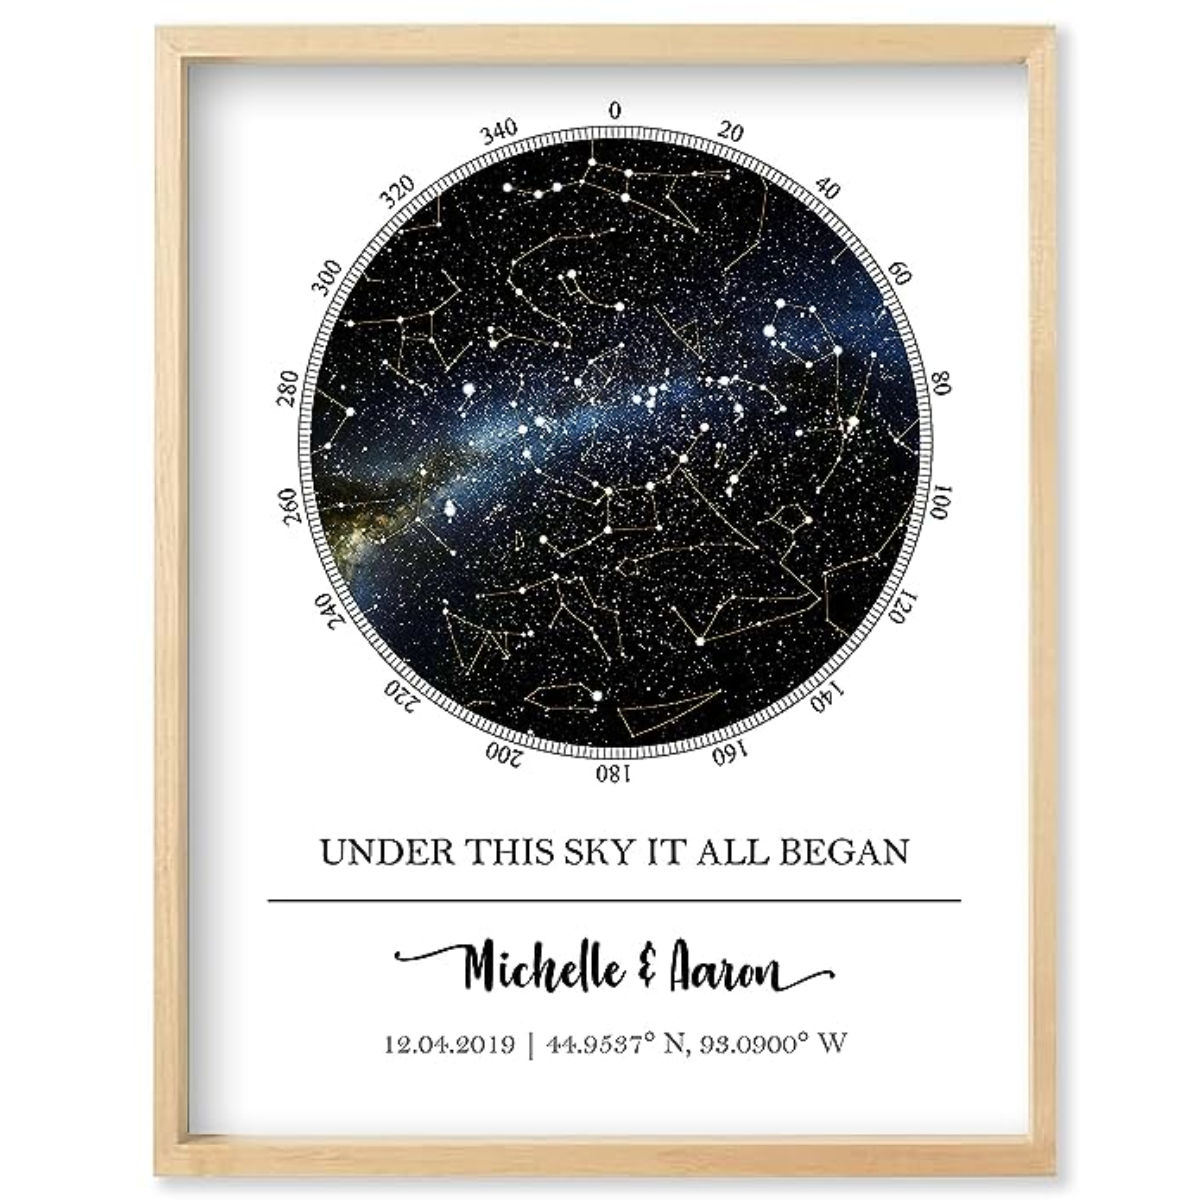 9. Capture Your Love Story with a Unique Customized Star Map Anniversary Gift for Him